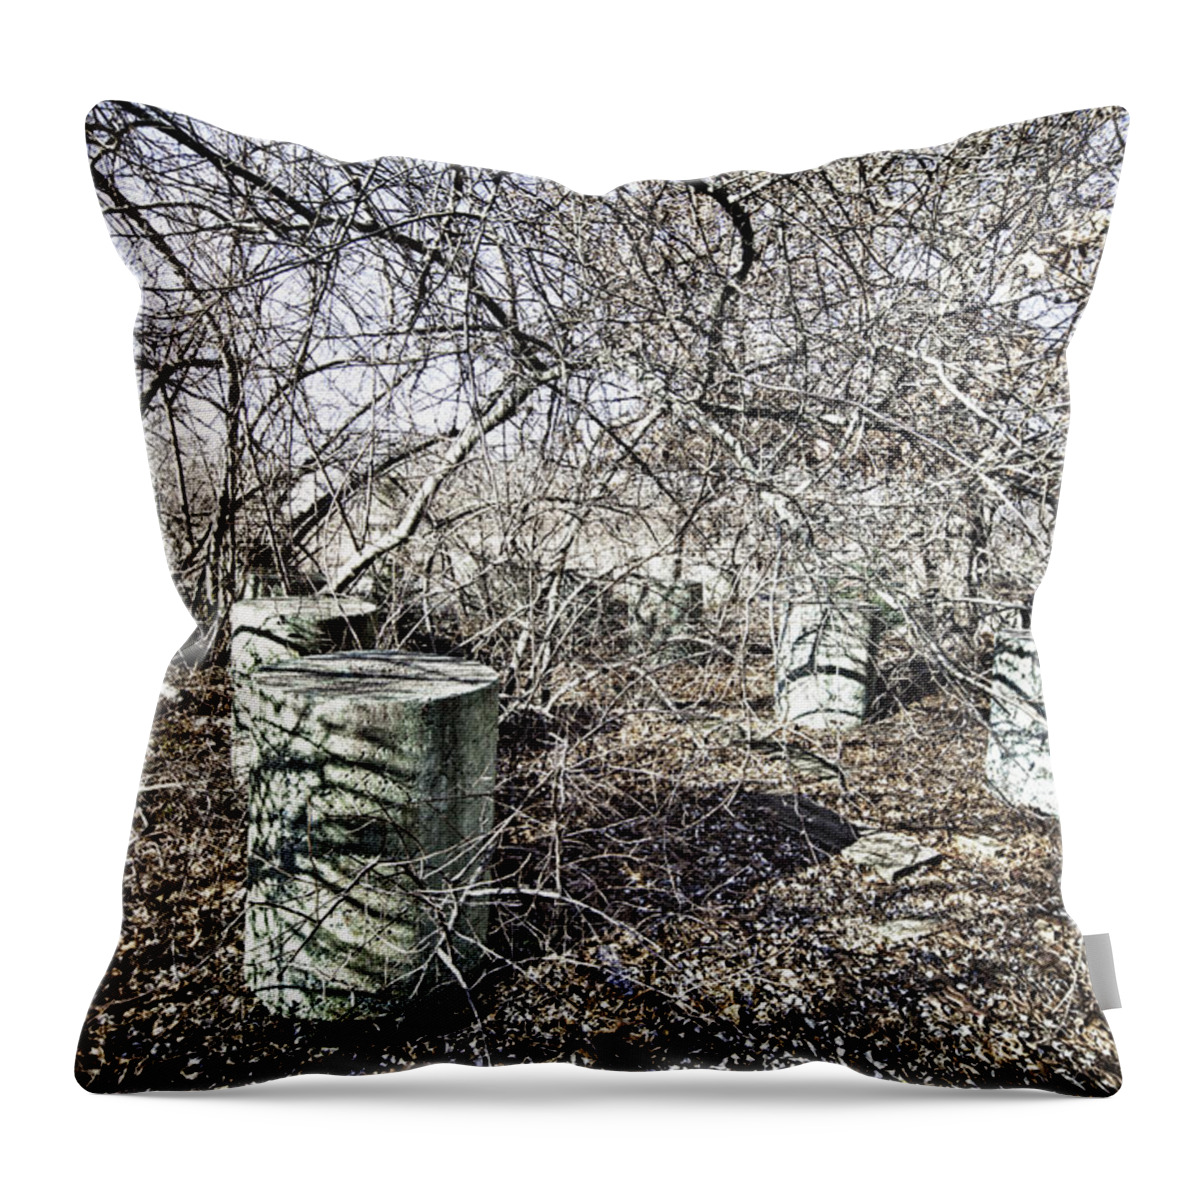 Lincoln Park Throw Pillow featuring the photograph Cementhenge by Kate Hannon